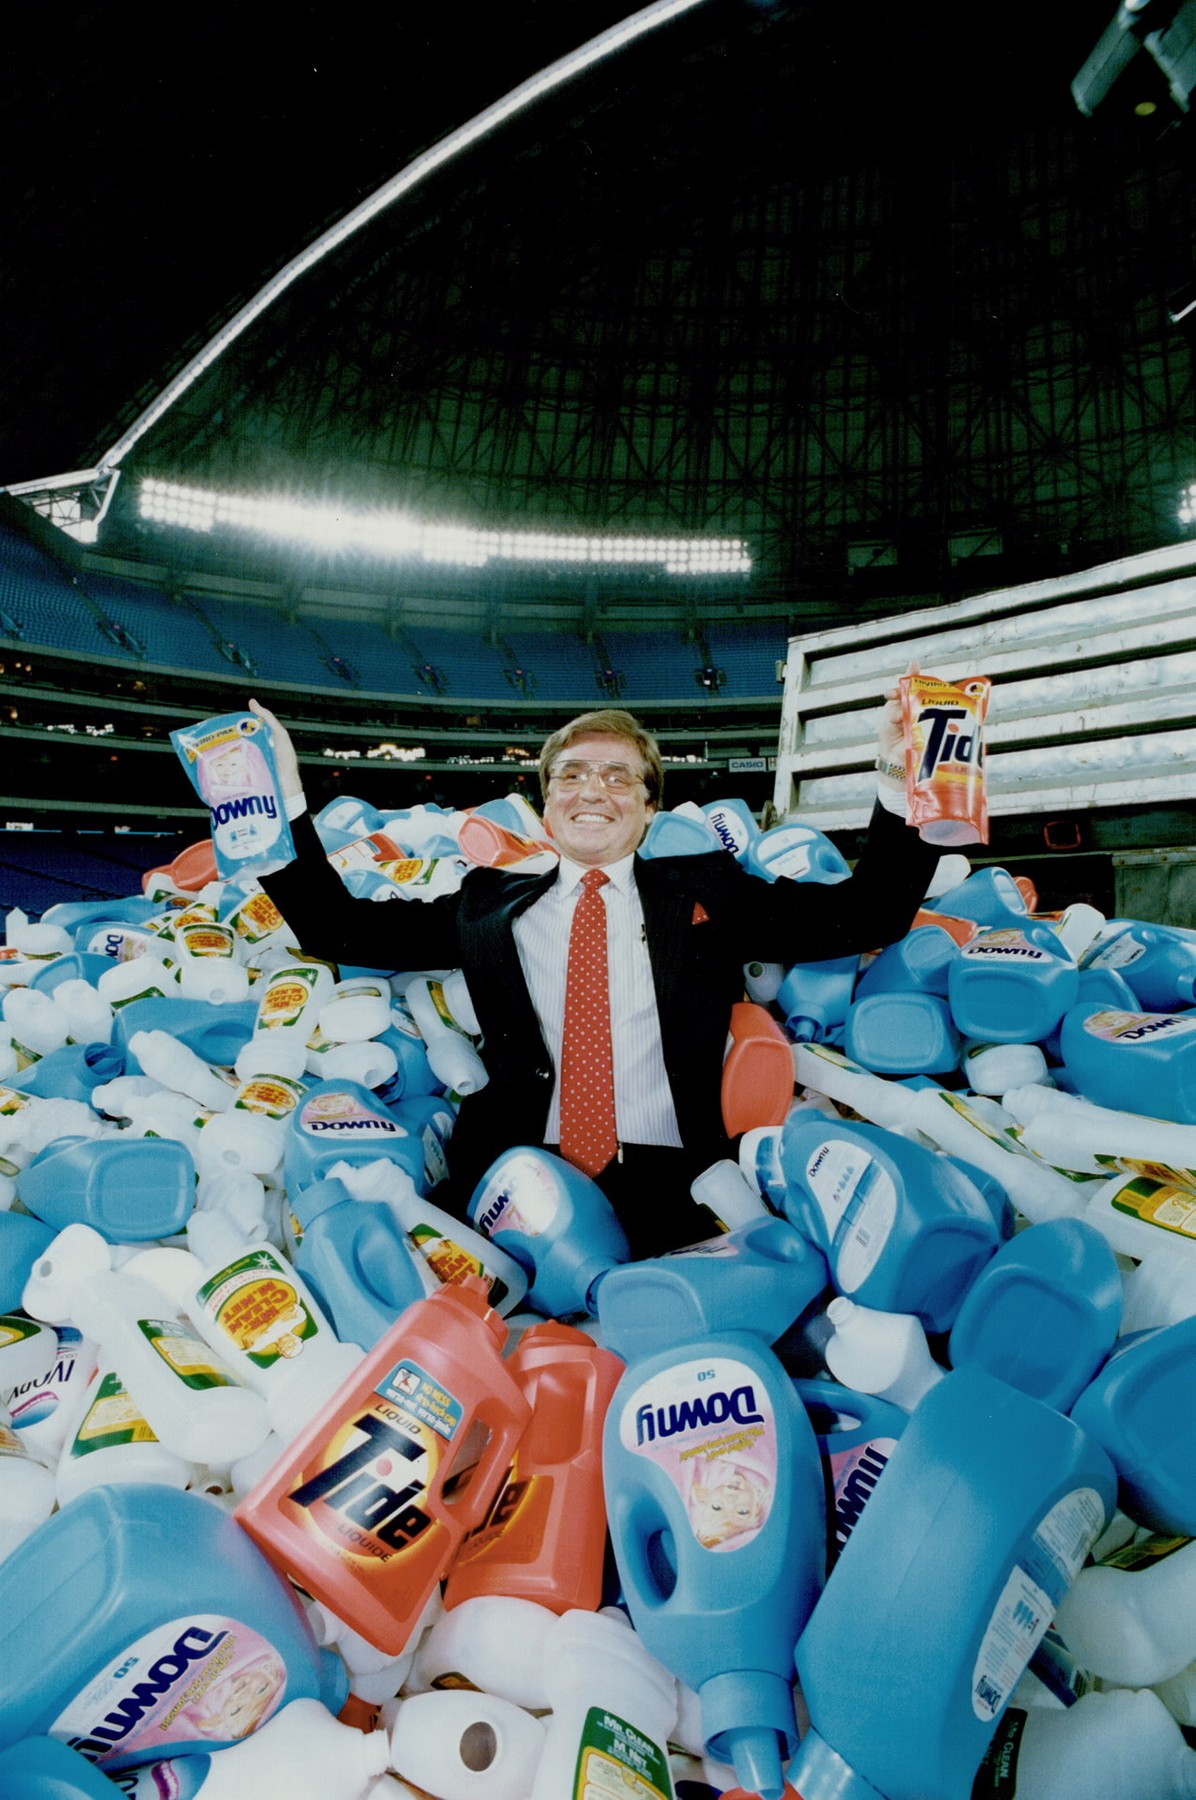 Waste not: Douglas Grindstaff on the SkyDome field, amid discarded plastic bottles. Right, he shows how they can be refilled.